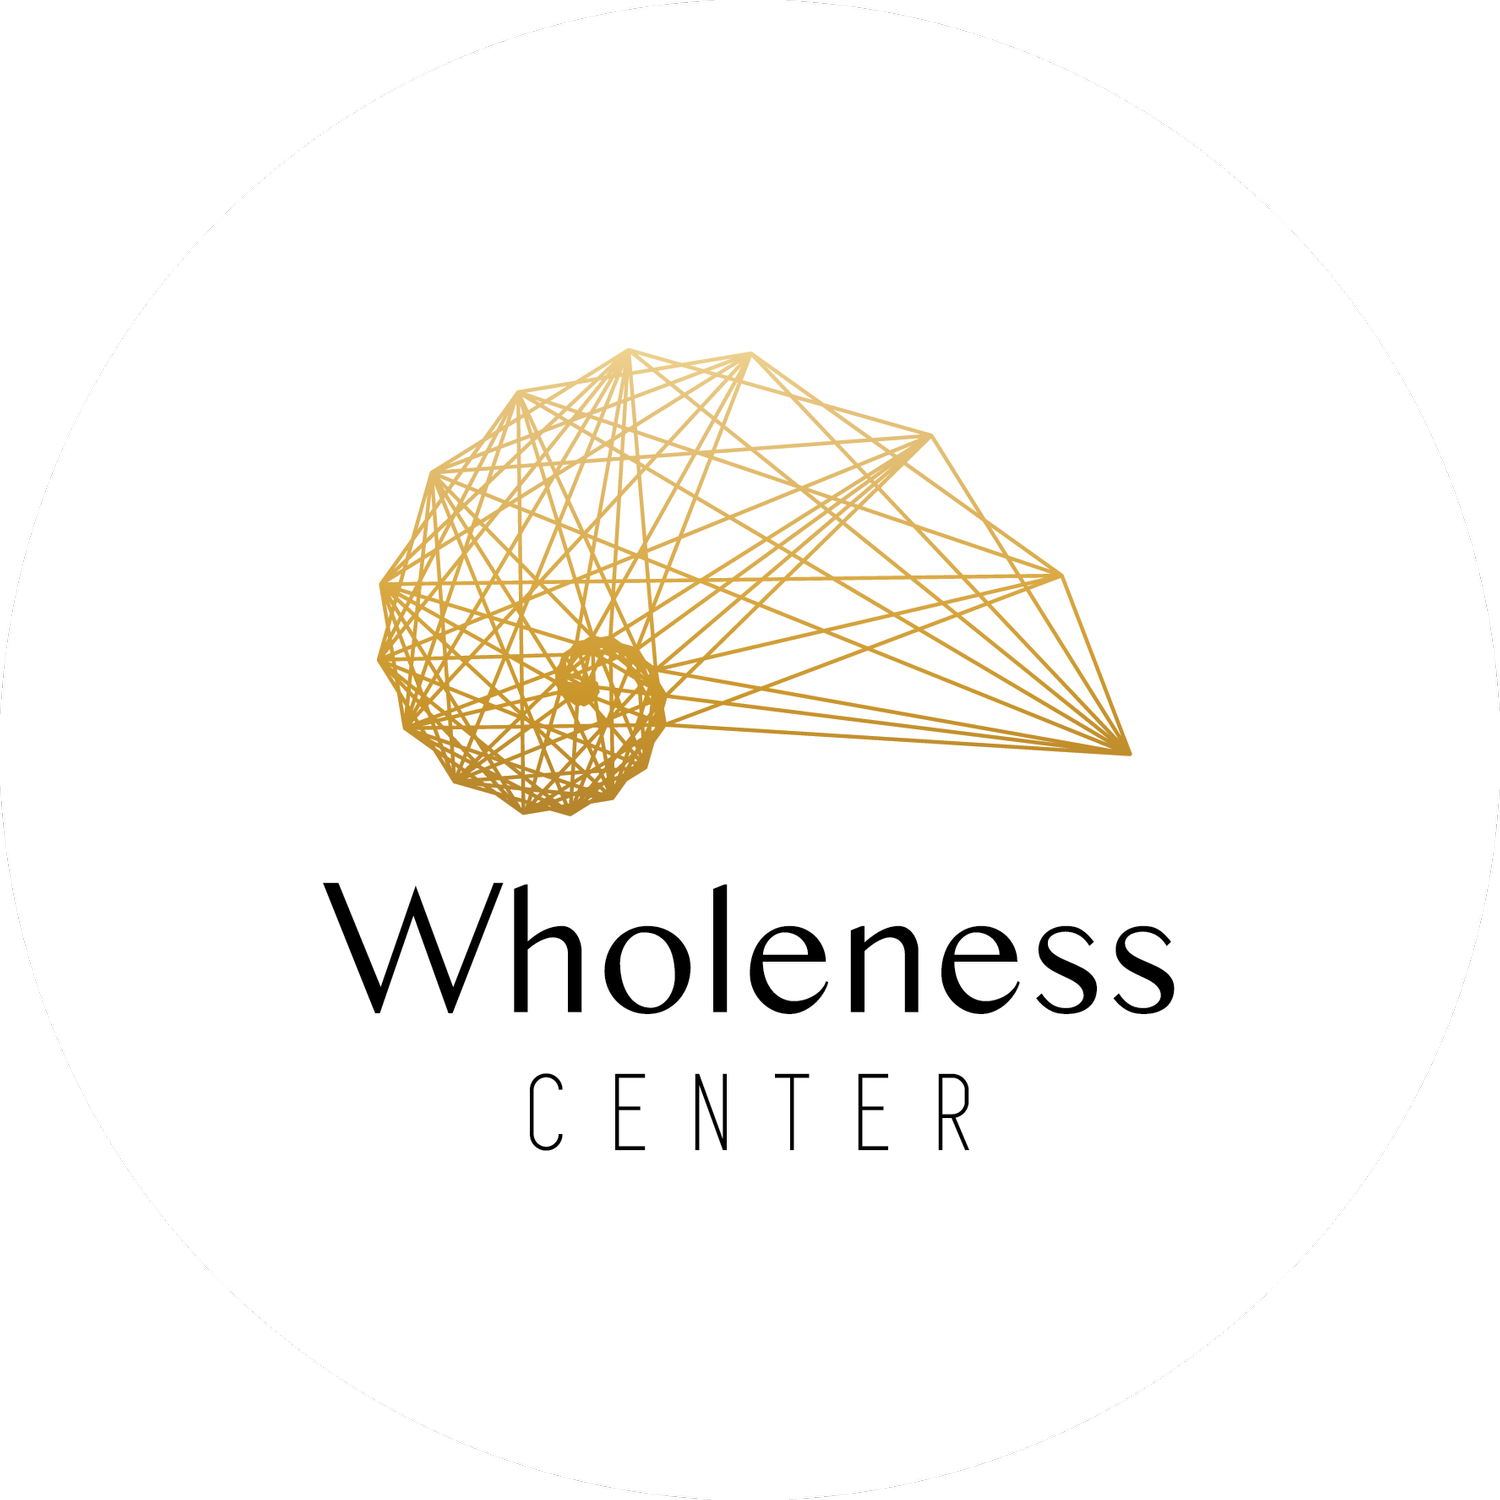 Wholeness Center